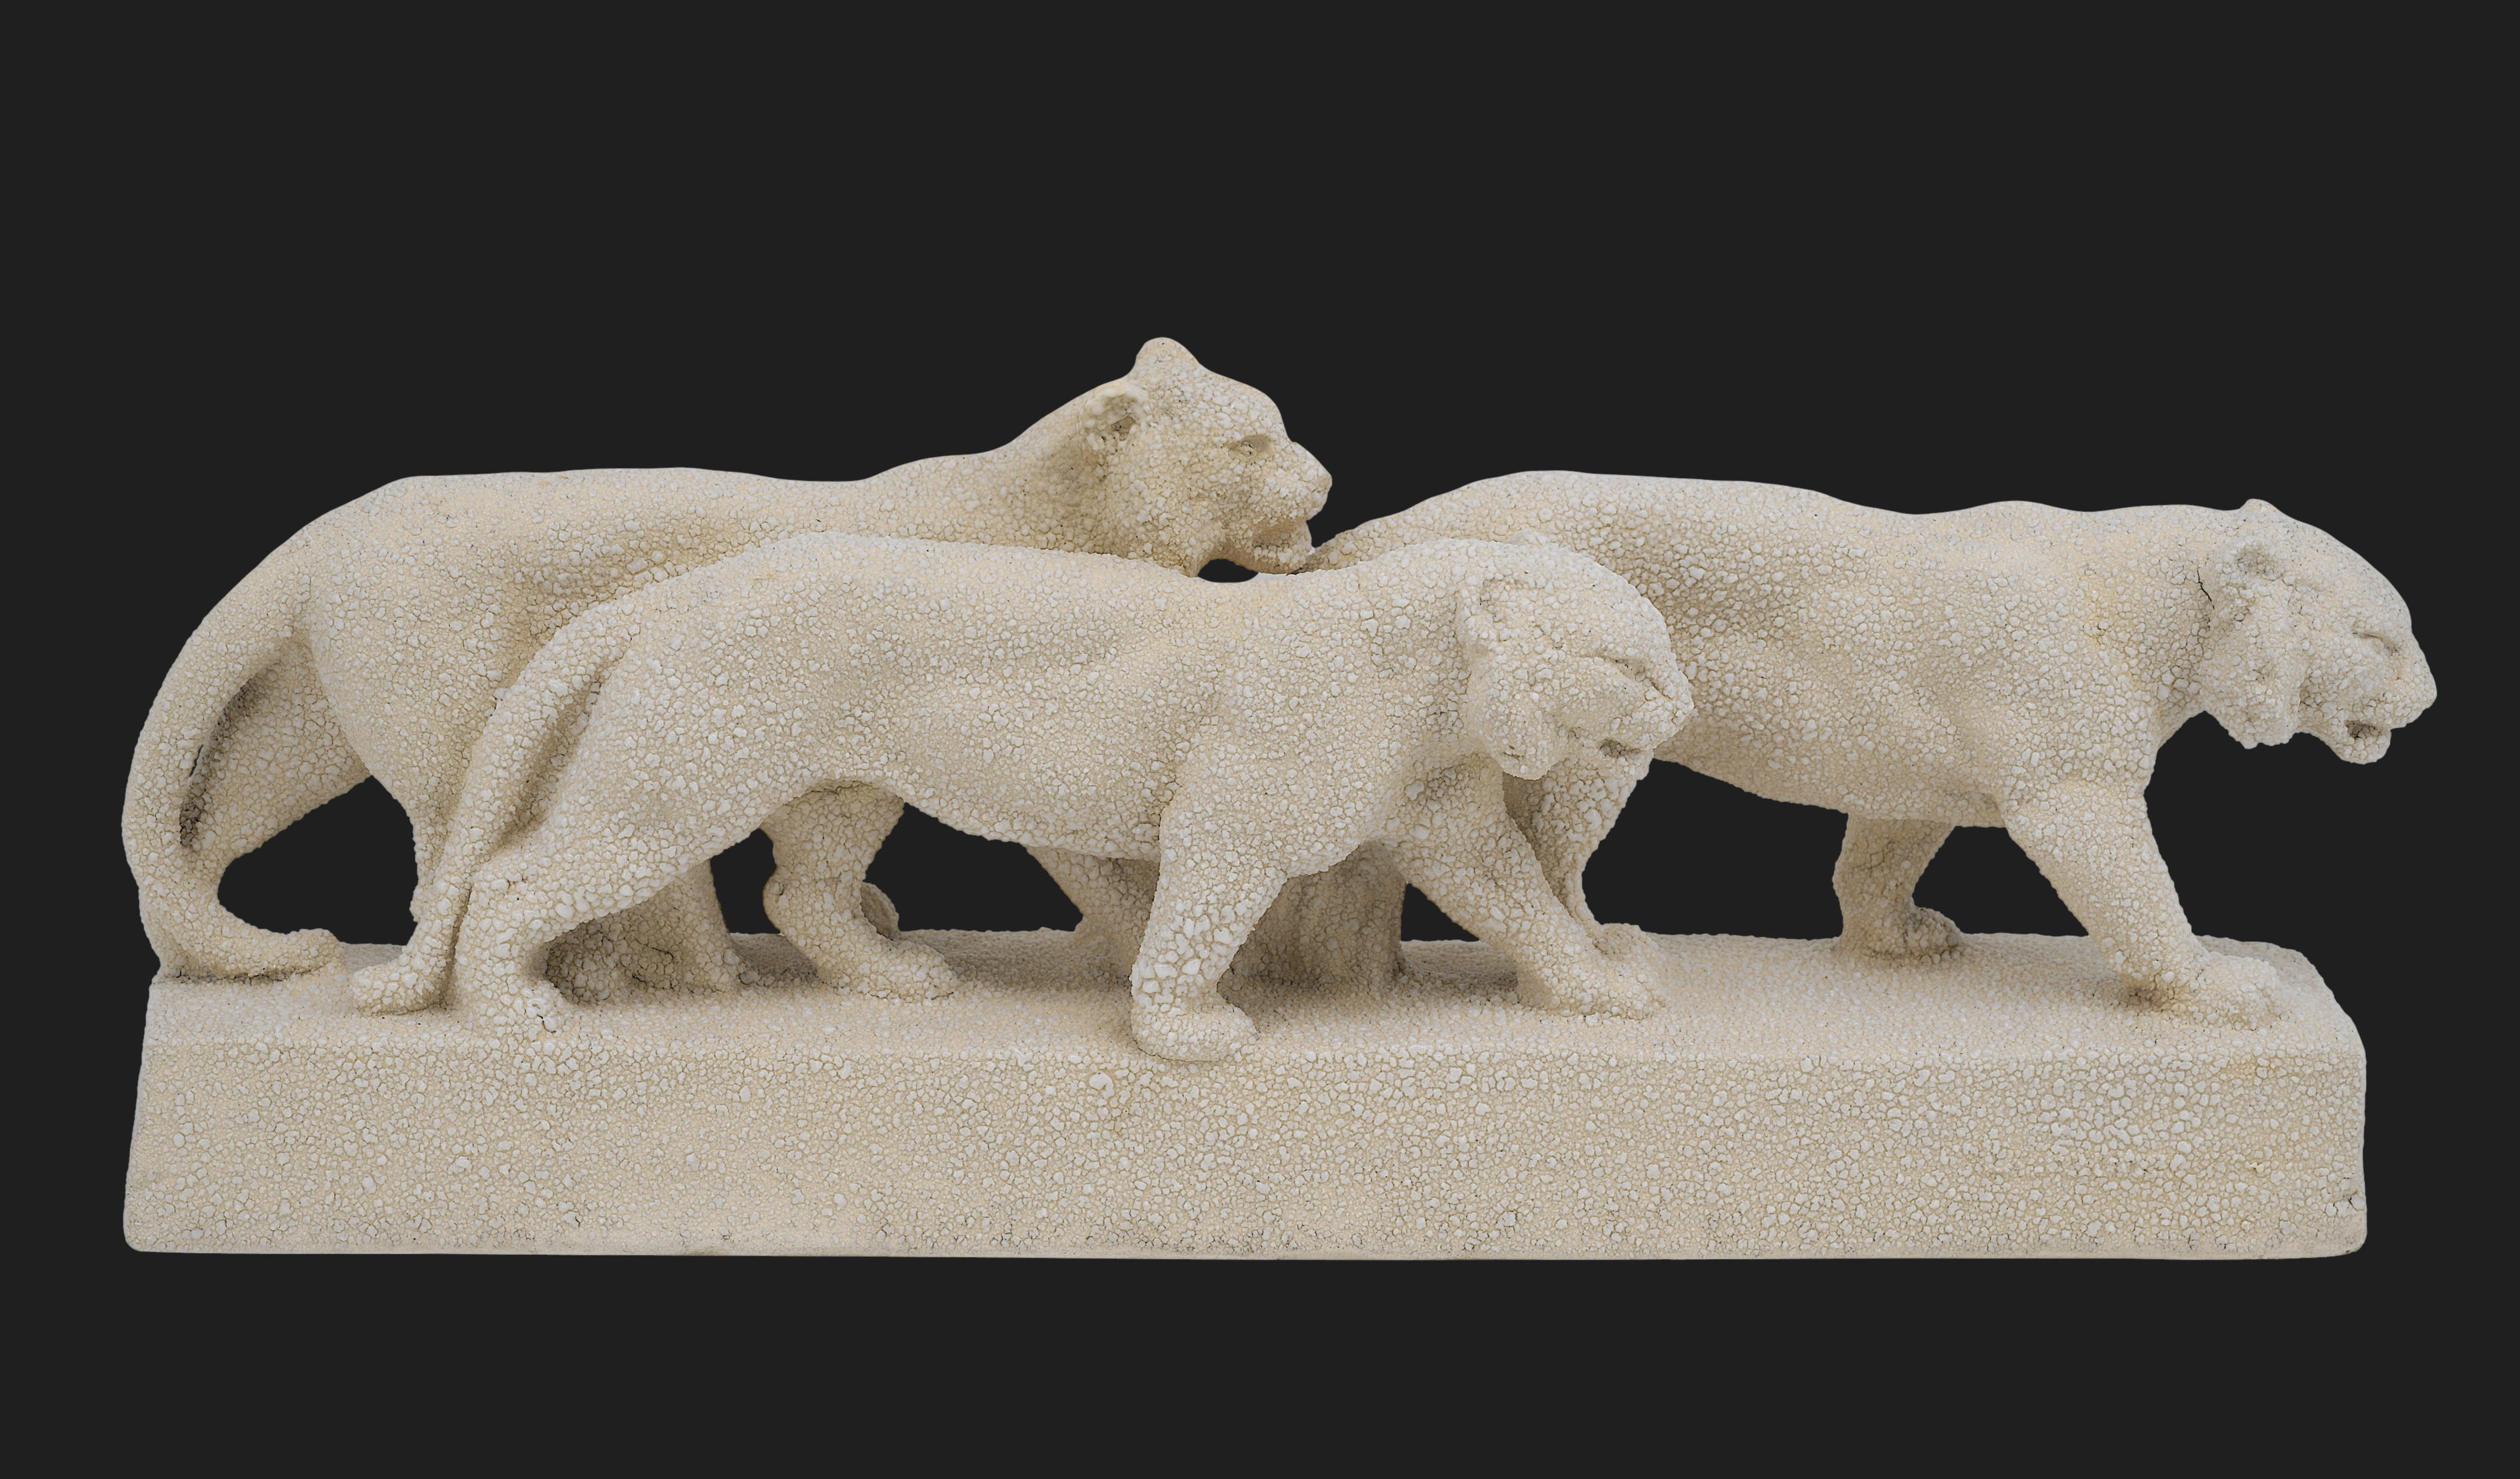 French Art Deco ceramic sculpture by Odette Berlot & Yvonne Mussier (Vierzon, 1927-1940), France, 1930s. Three tigers. Measures: height: 8.3